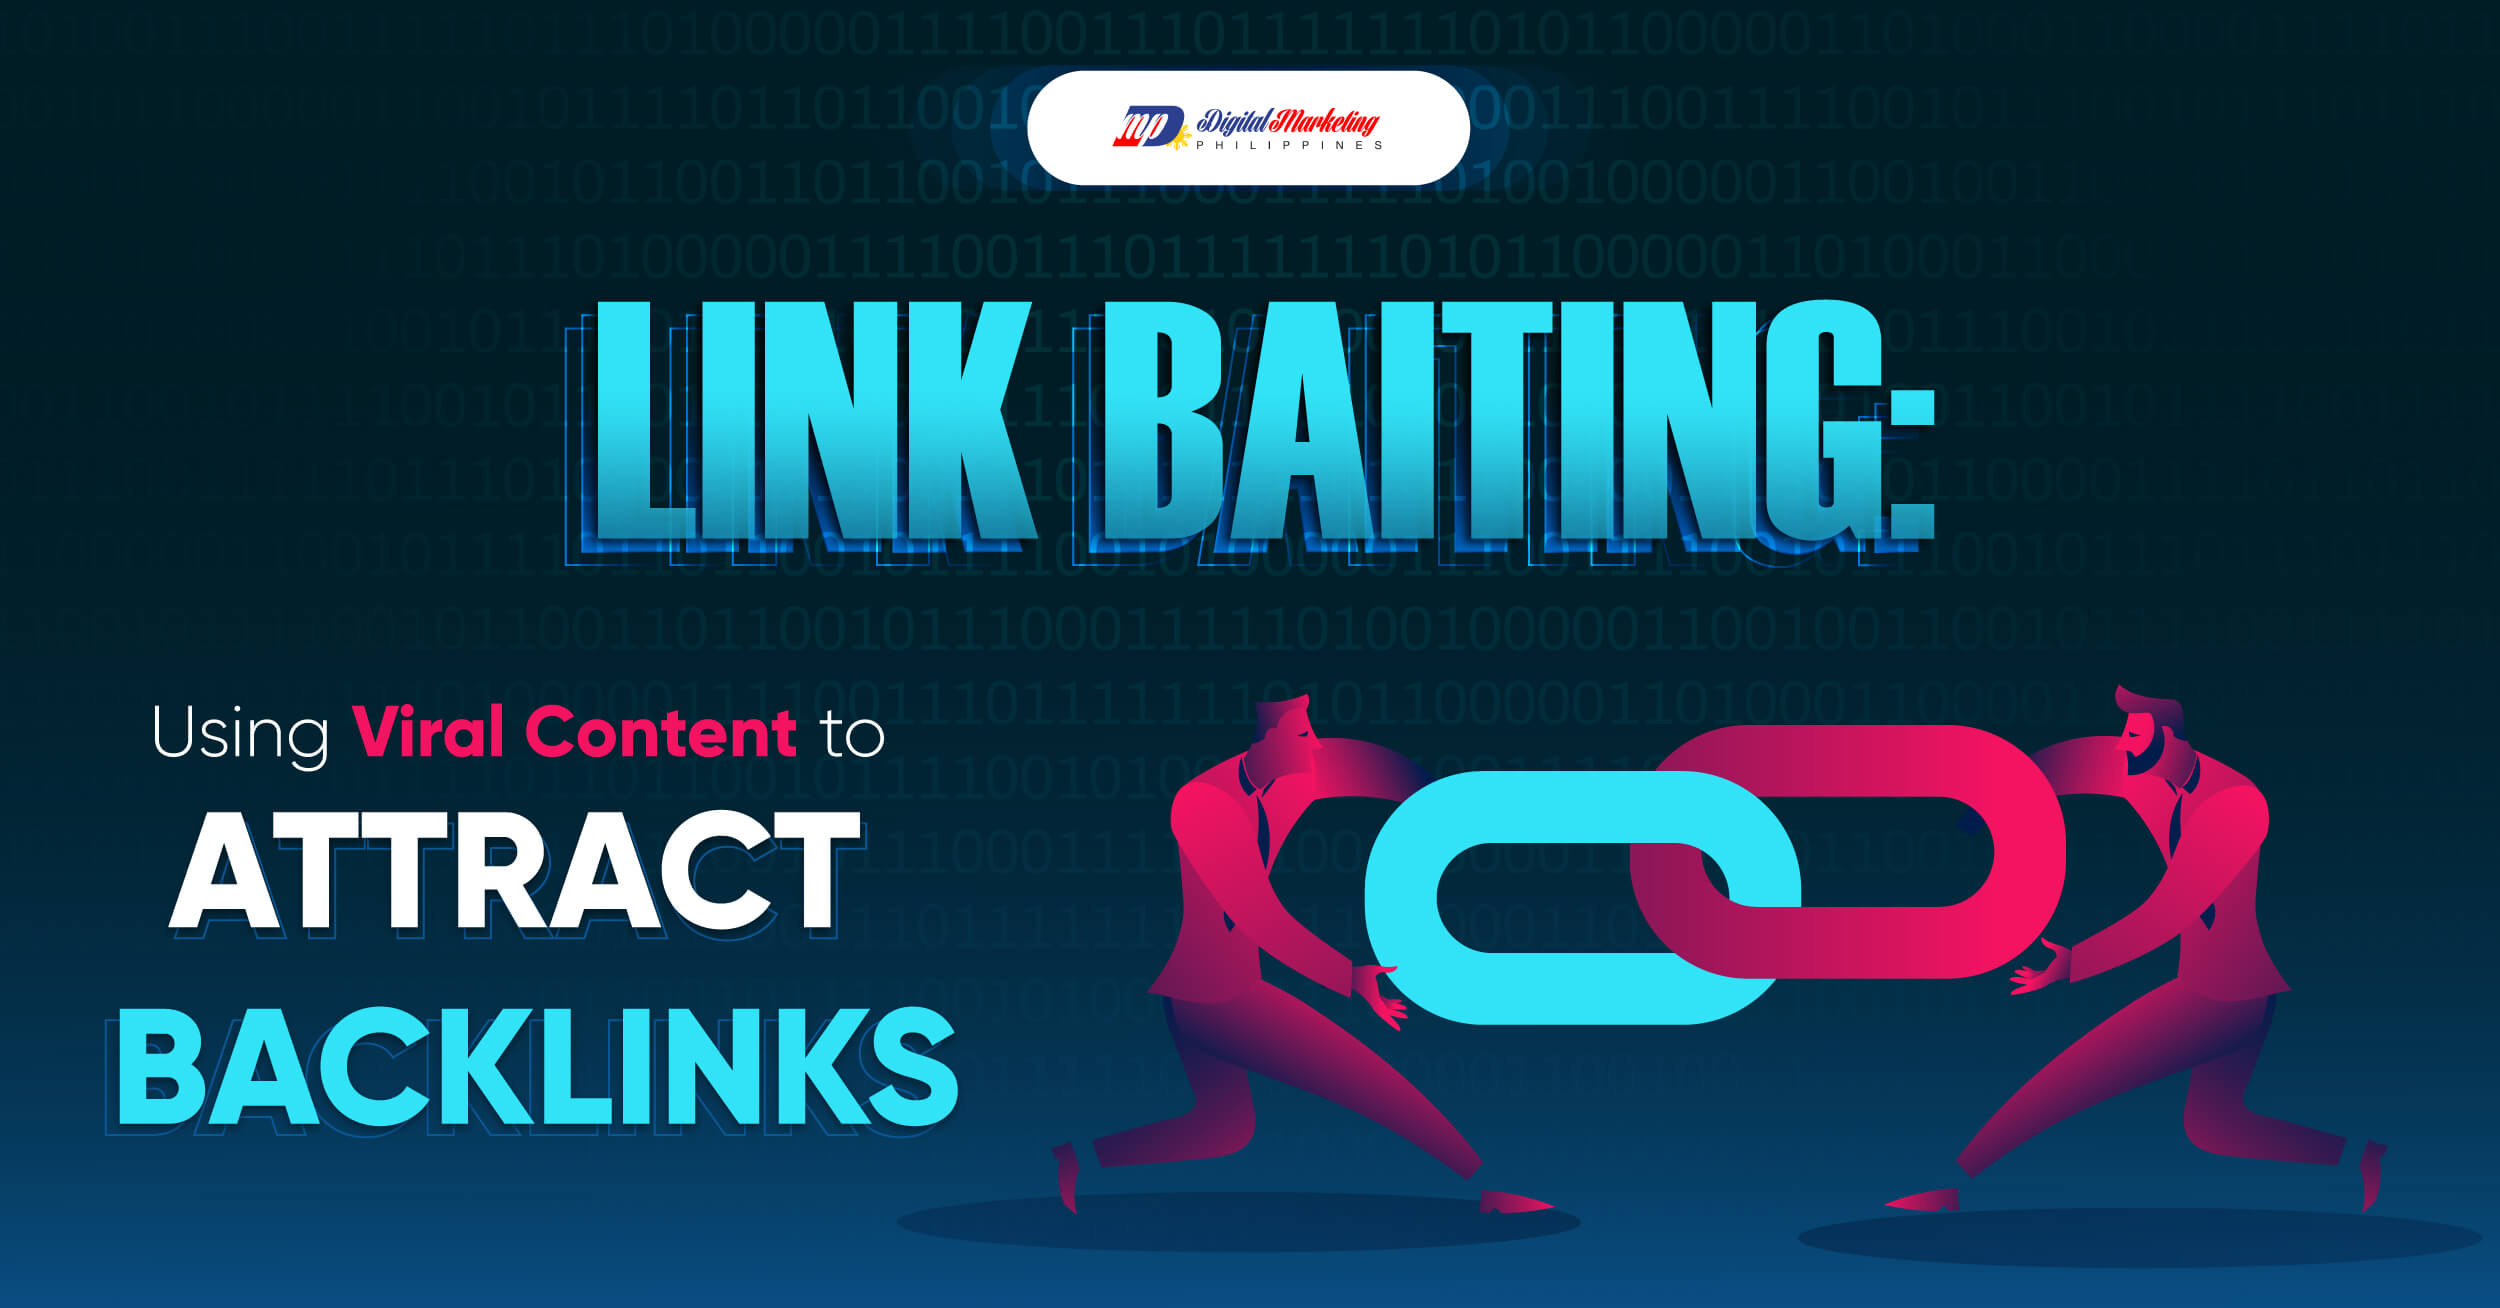 Link Baiting: Using Viral Content to Attract Backlinks featured image